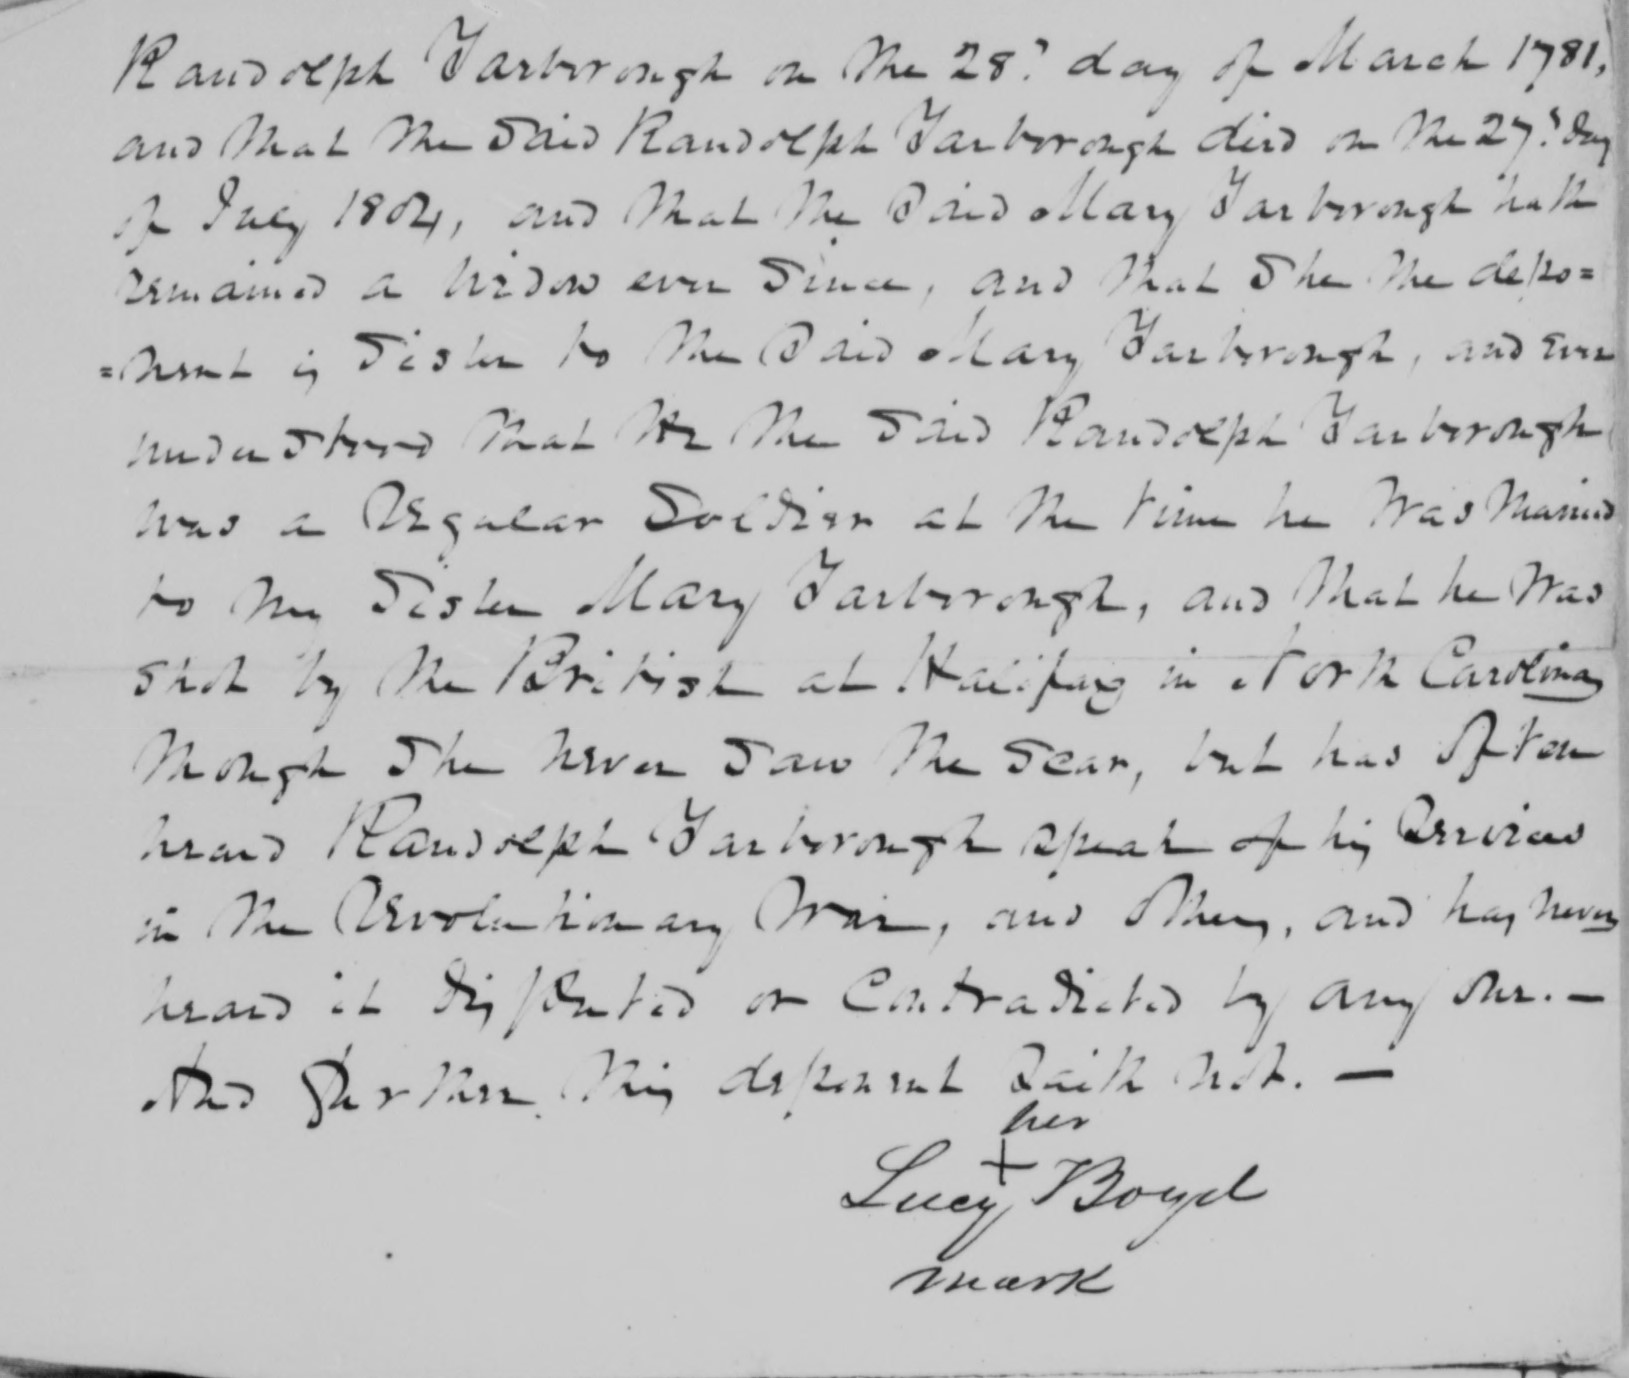 Affidavit of Lucy Boyd in support of a Pension Claim for Mary Yarborough, 8 July 1839, page 2